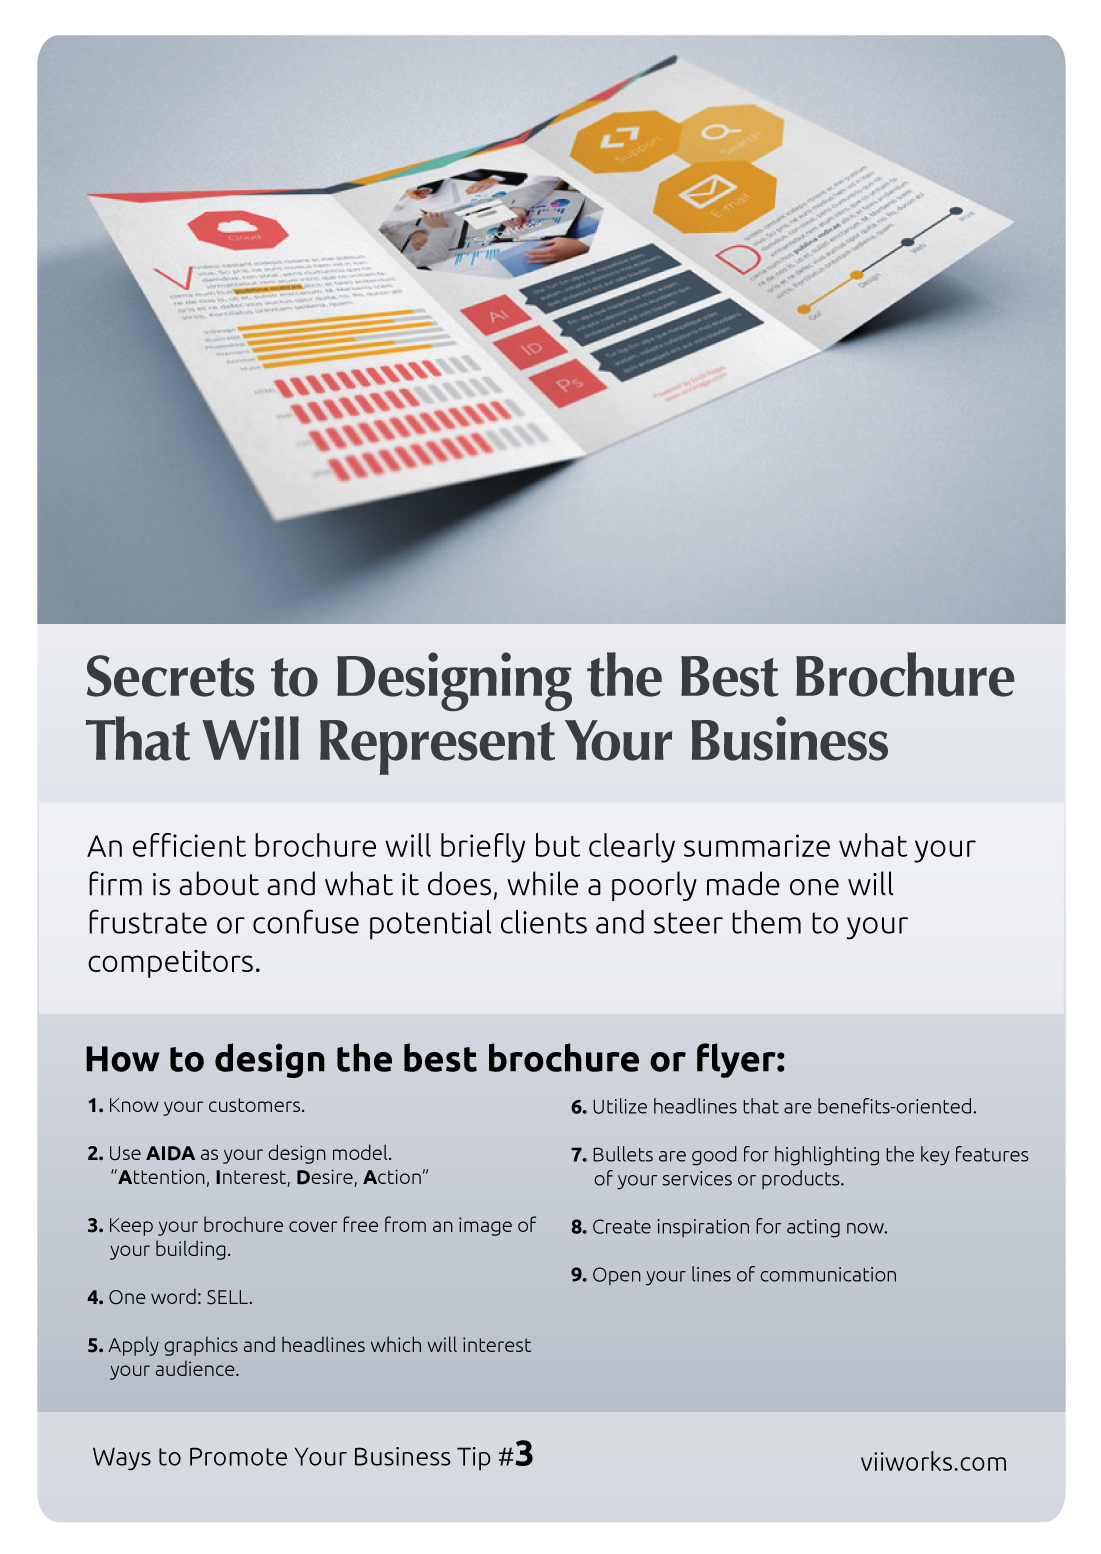 Card - Secrets to Designing the Best Brochure That Will Represent Your Business